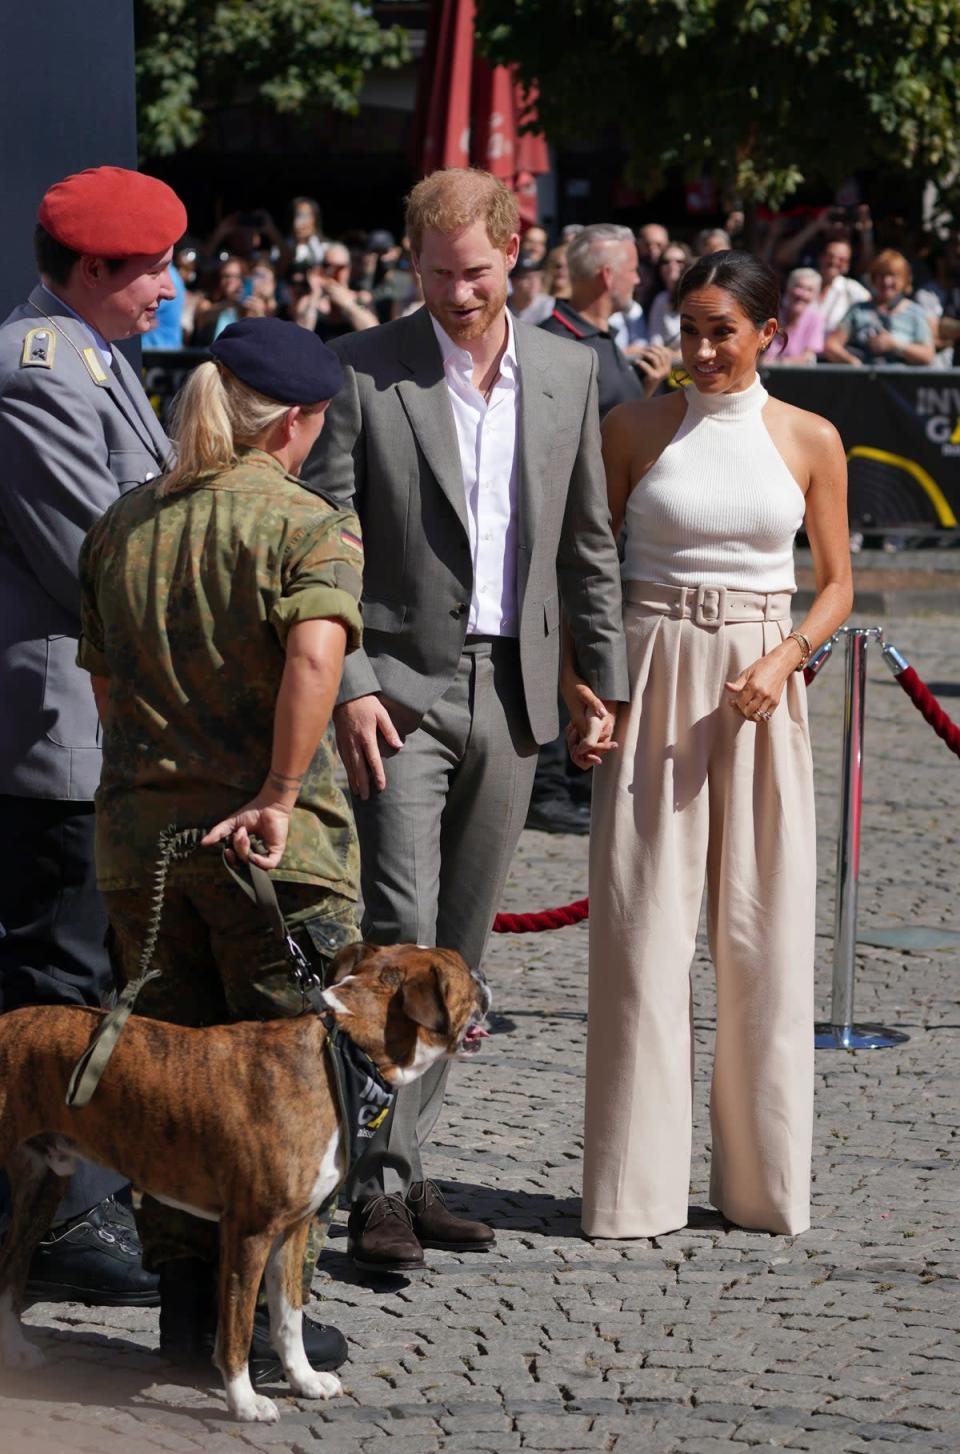 The Duke and Duchess of Sussex arrive at City Hall in Dusseldorf (Joe Giddens/PA) (PA Wire)